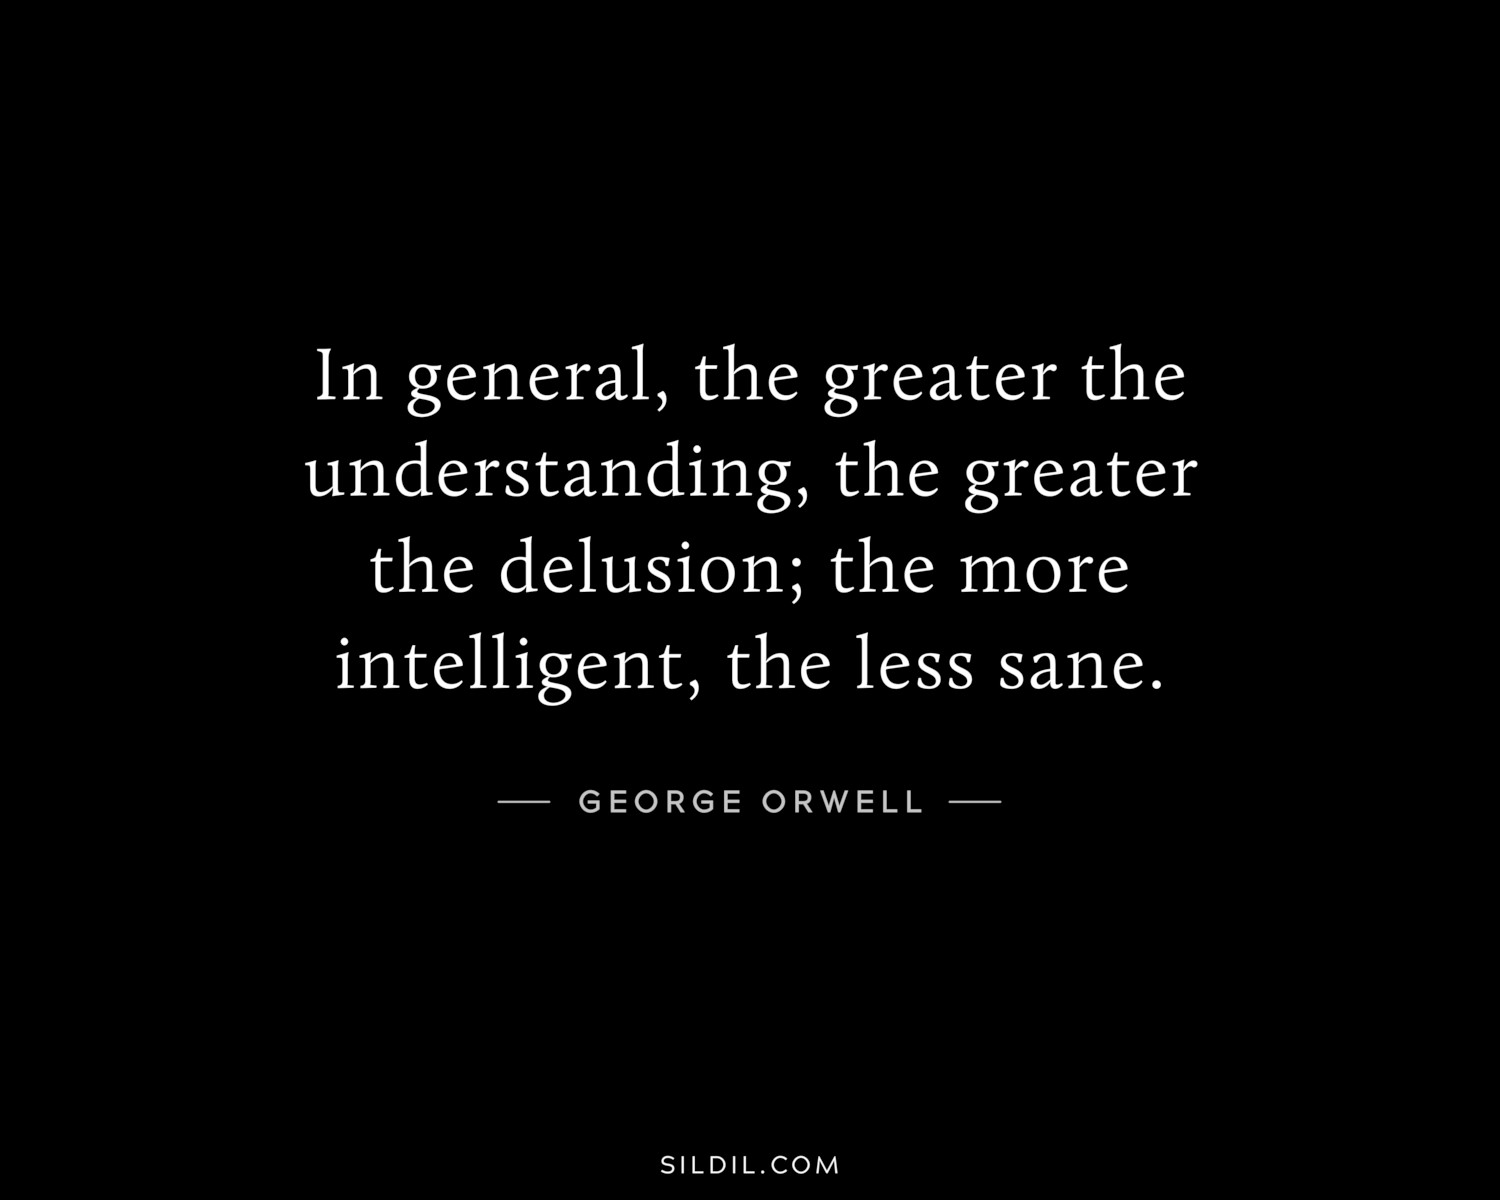 In general, the greater the understanding, the greater the delusion; the more intelligent, the less sane.